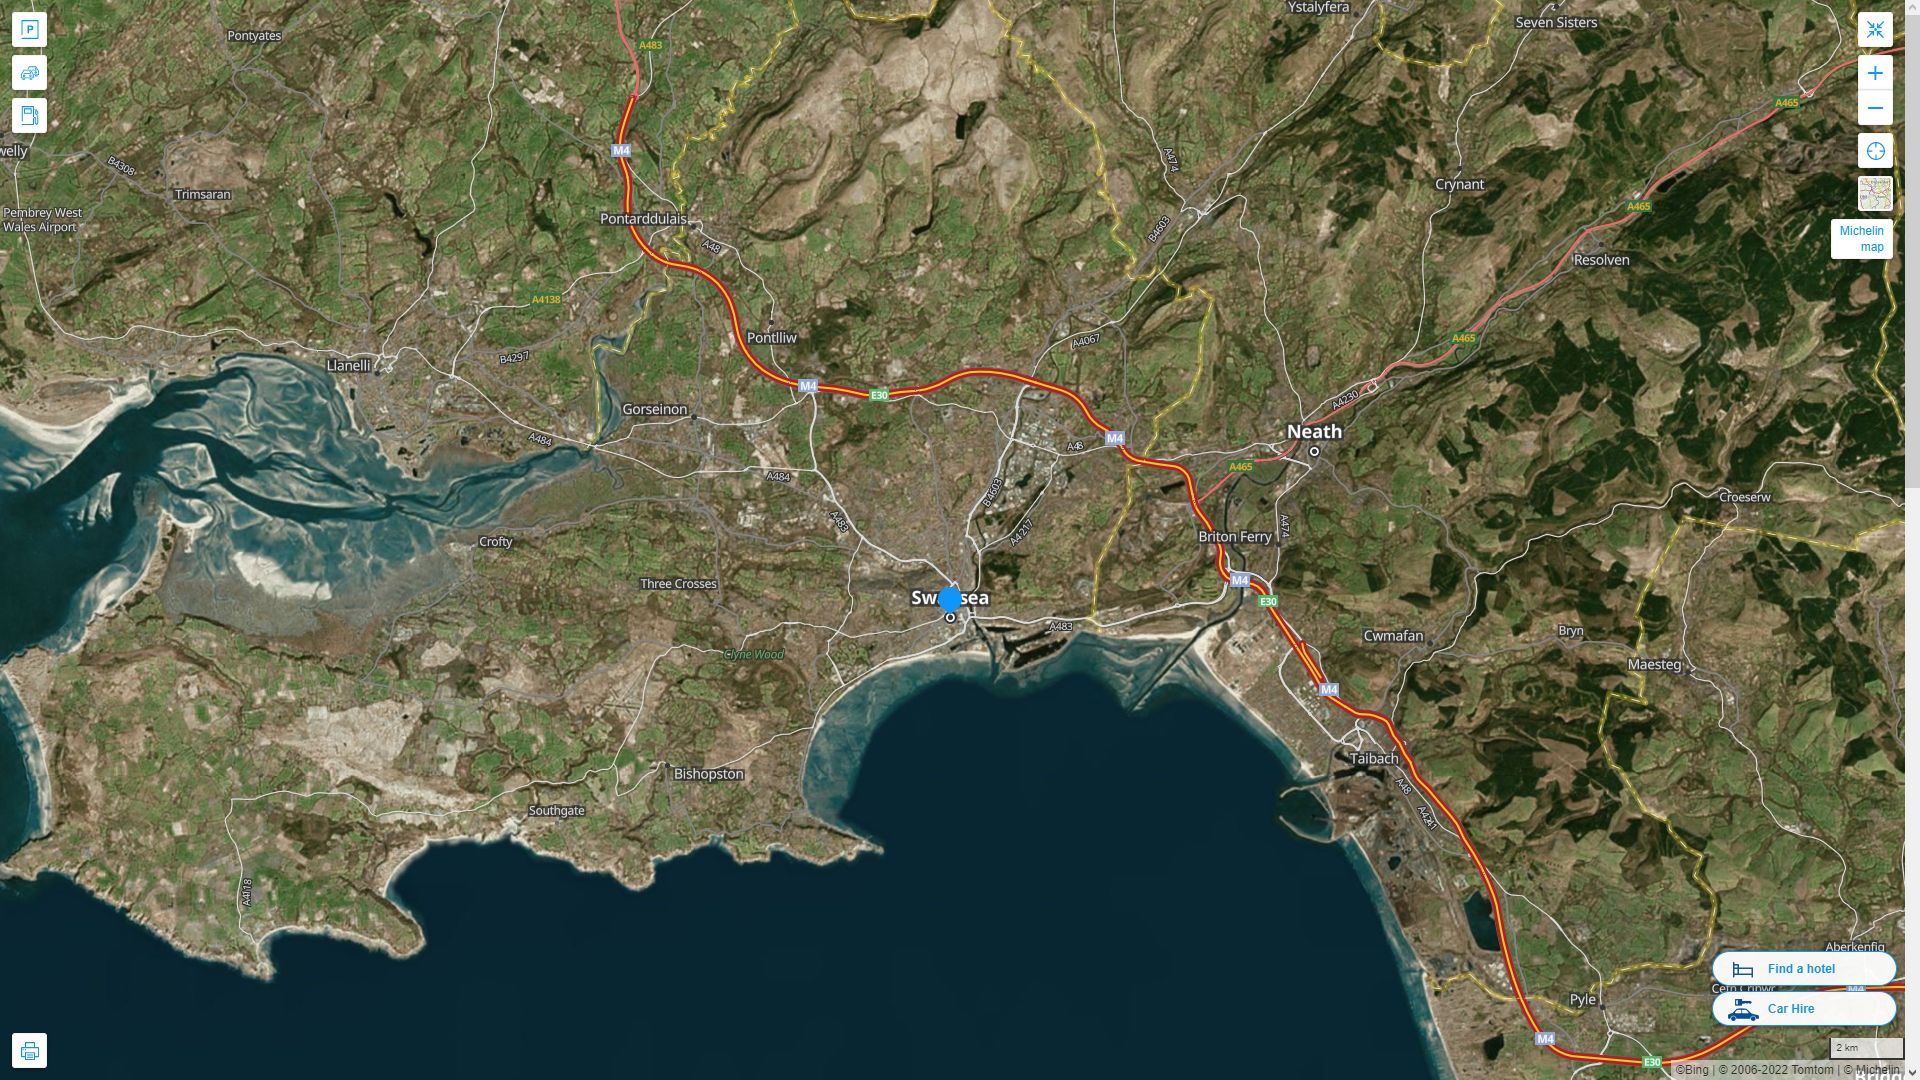 Swansea Highway and Road Map with Satellite View